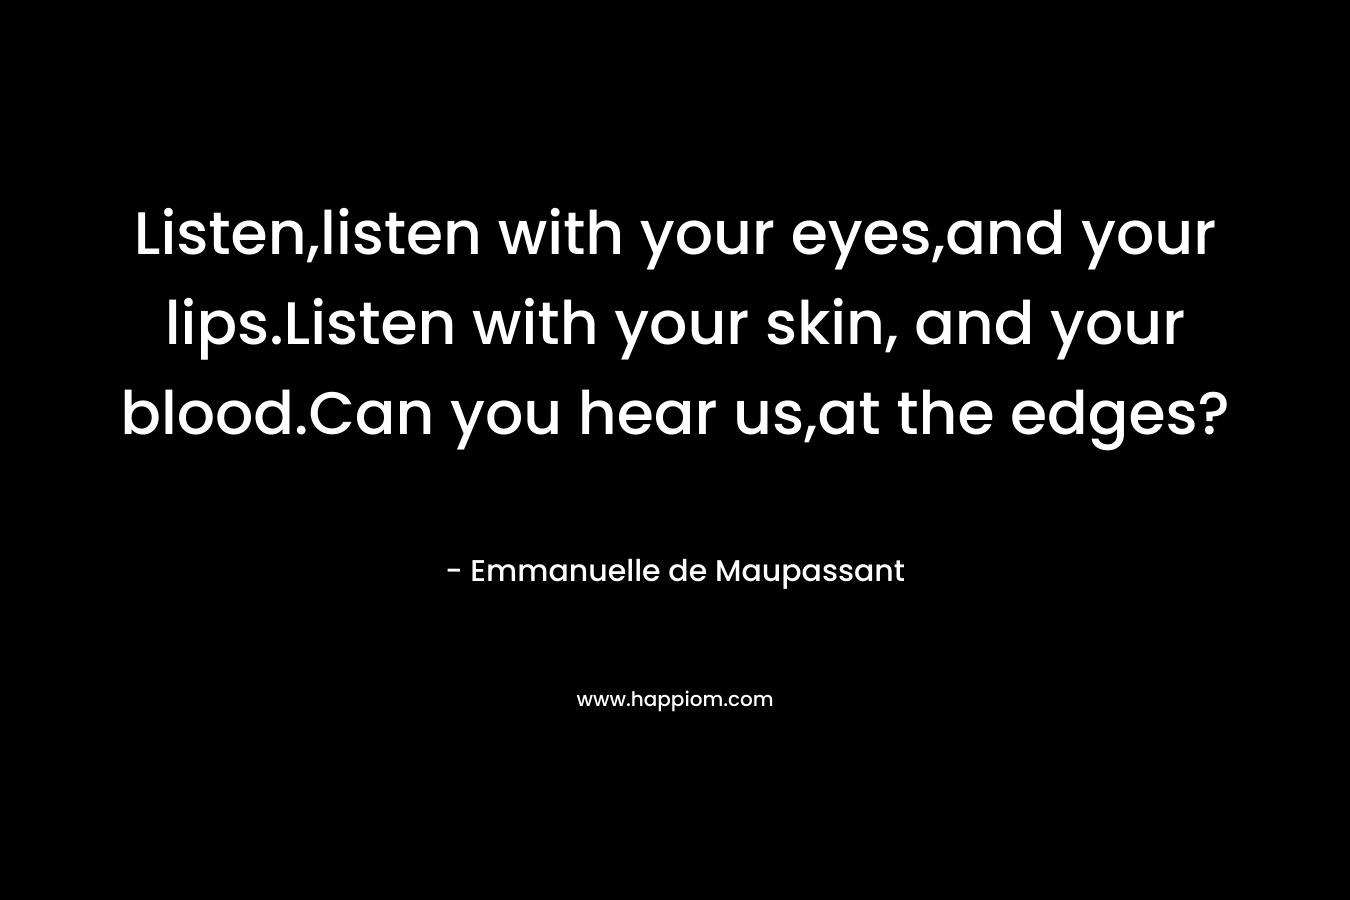 Listen,listen with your eyes,and your lips.Listen with your skin, and your blood.Can you hear us,at the edges?